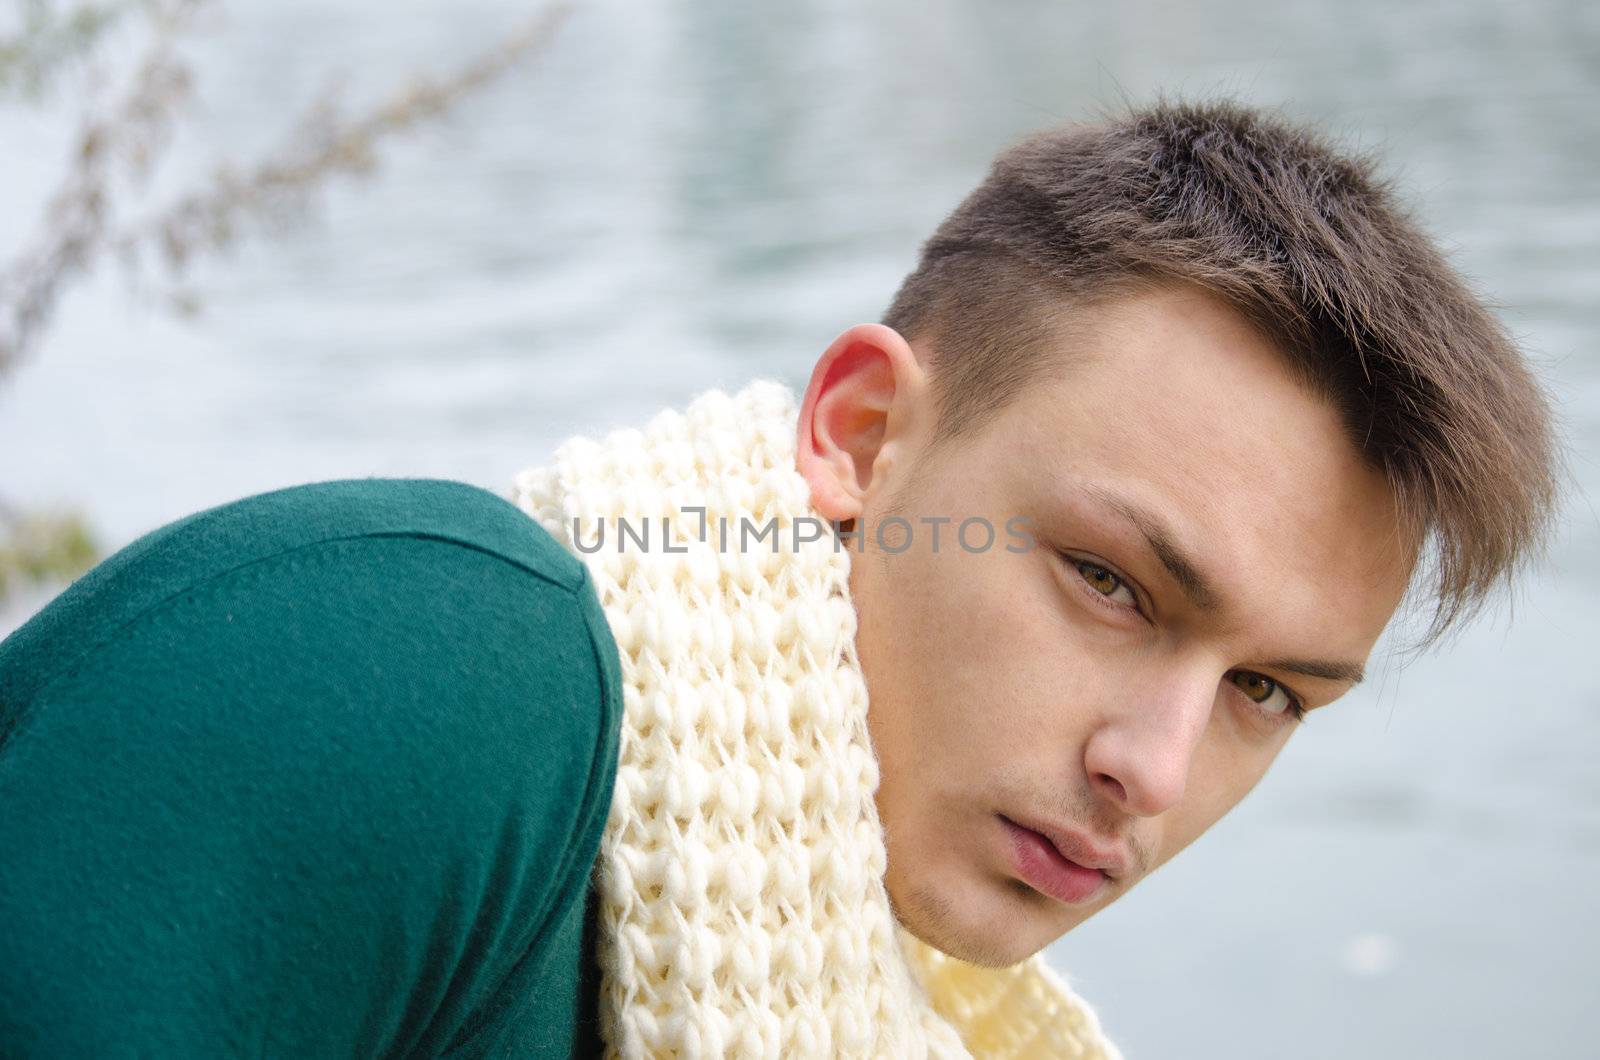 Good looking young man outdoors in nature (river, lake) by artofphoto